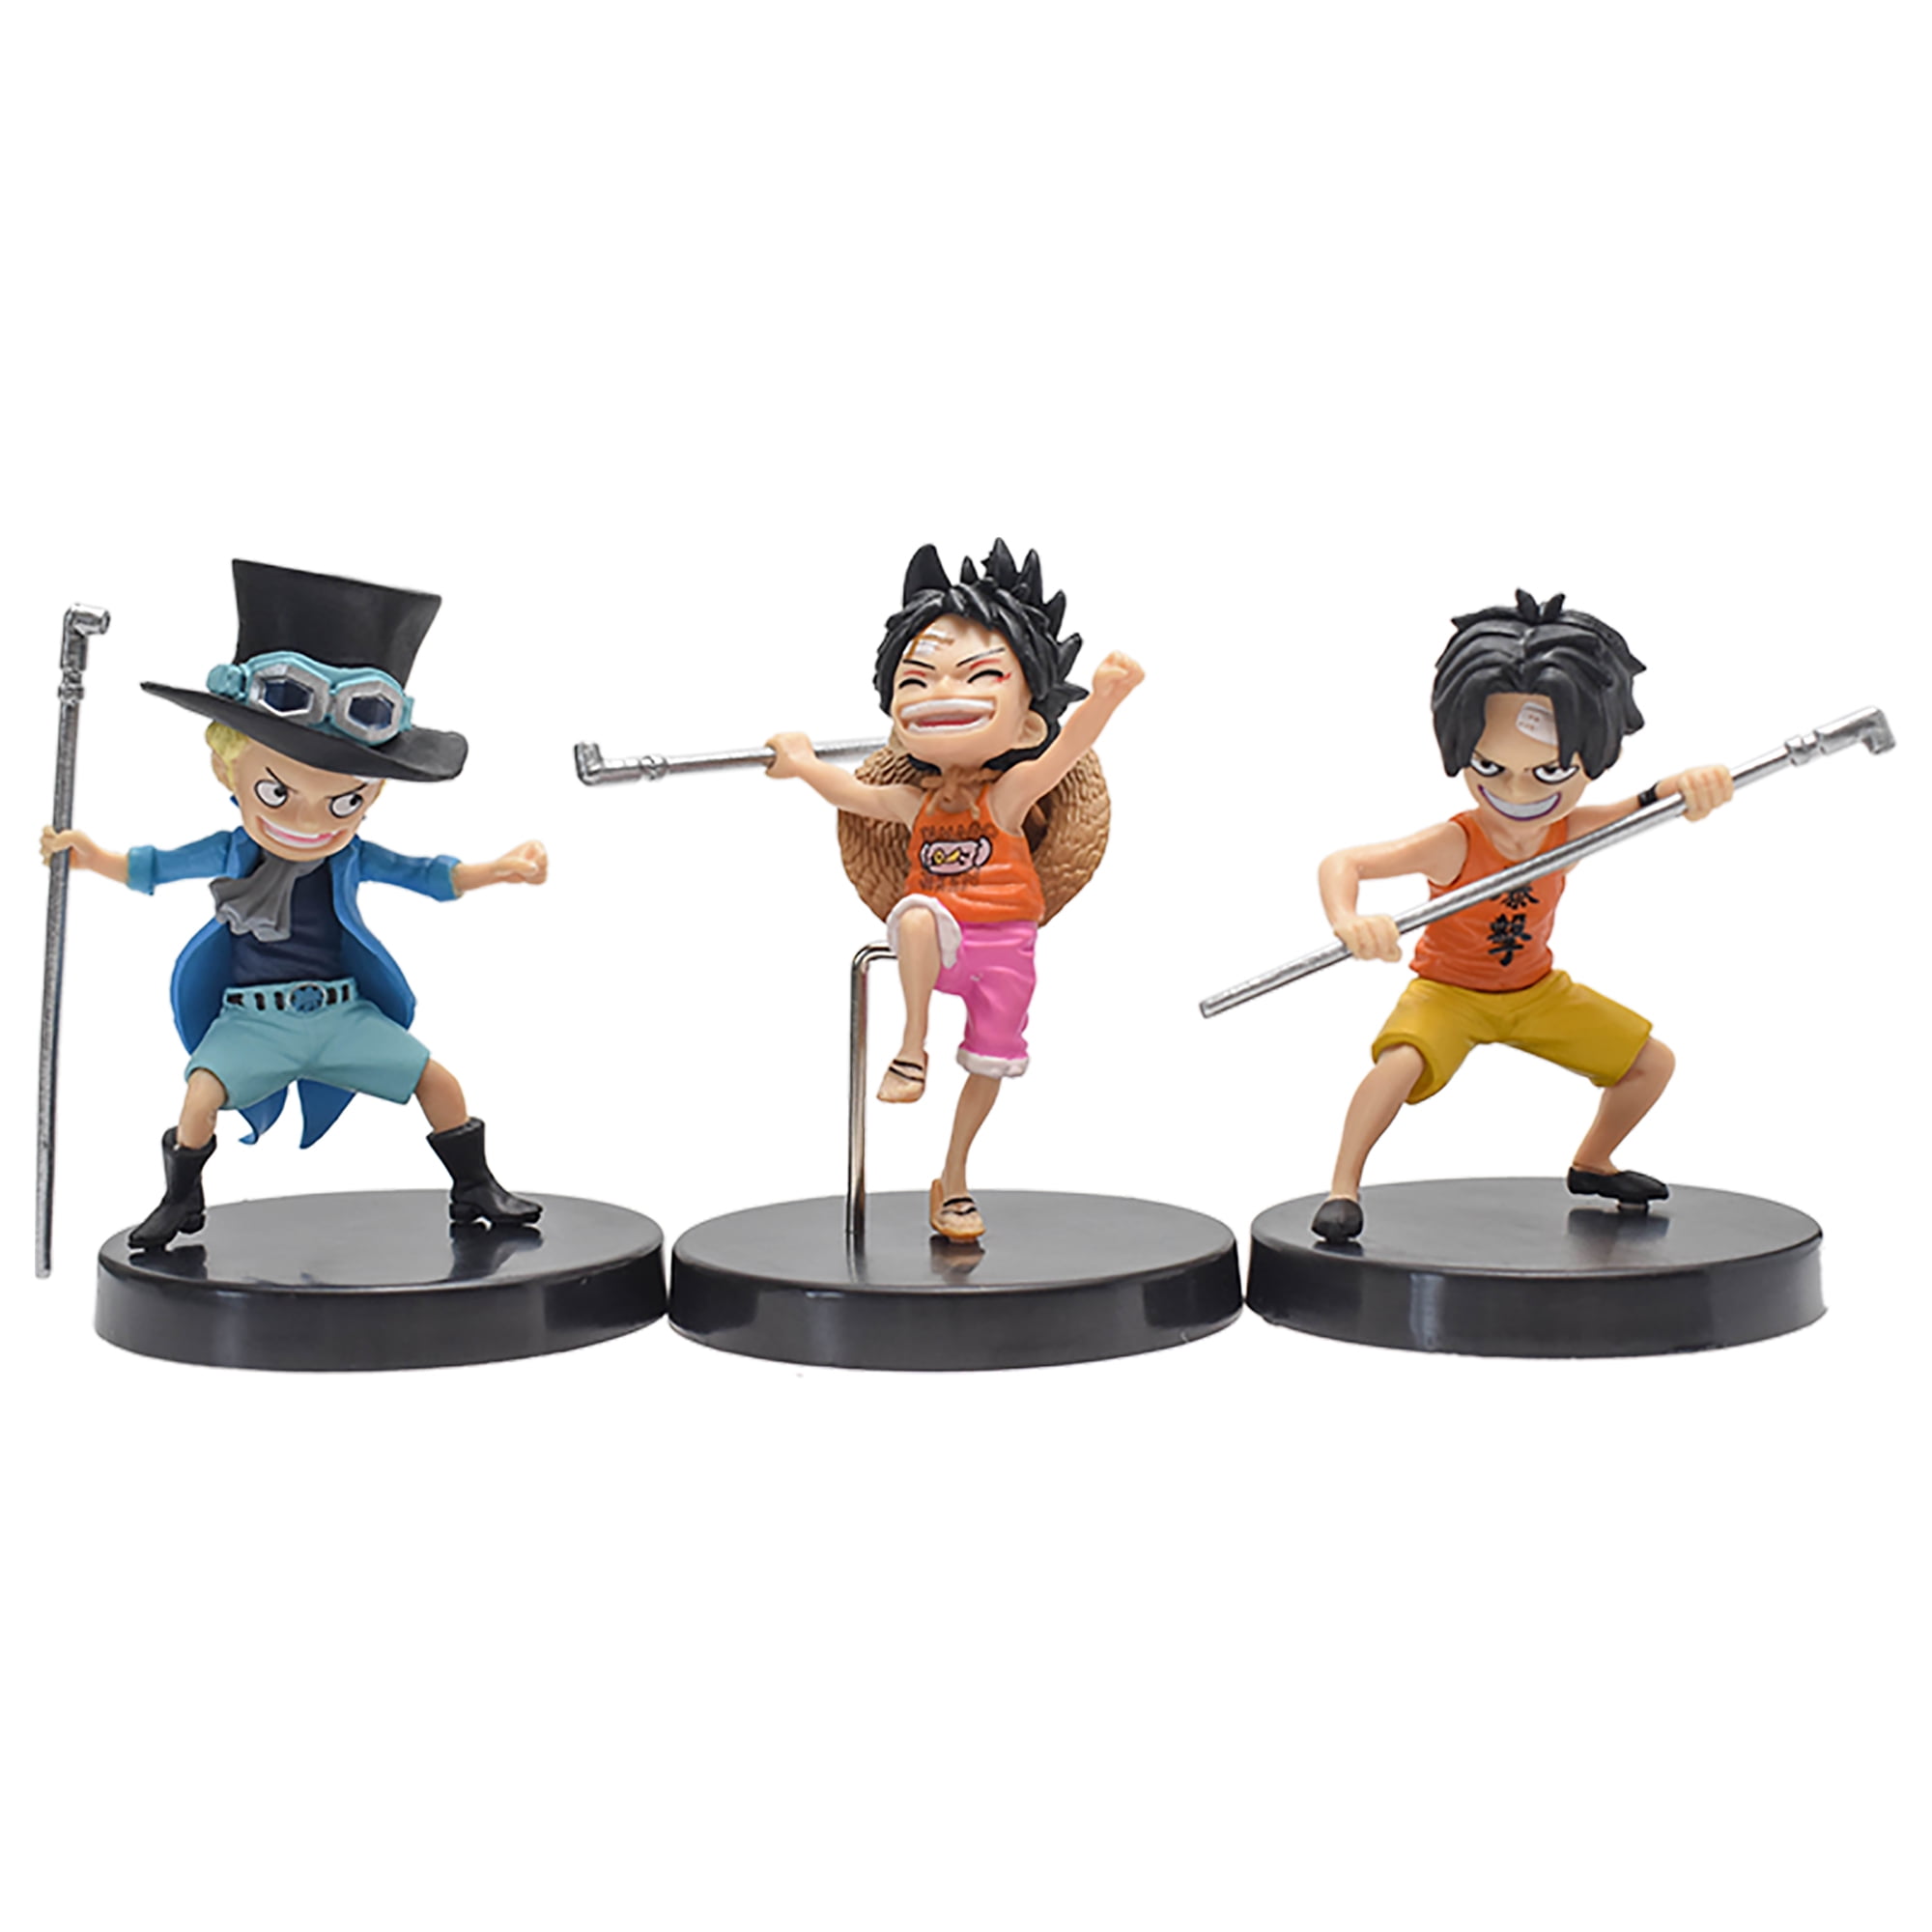 21cm PVC Model Statue Decoration Collection Animated Character Doll Toy Collection Home Decoration Crafts,B Luffy Sabo Anime Figure Toy Figures JINGMAI One Piece Action Figure